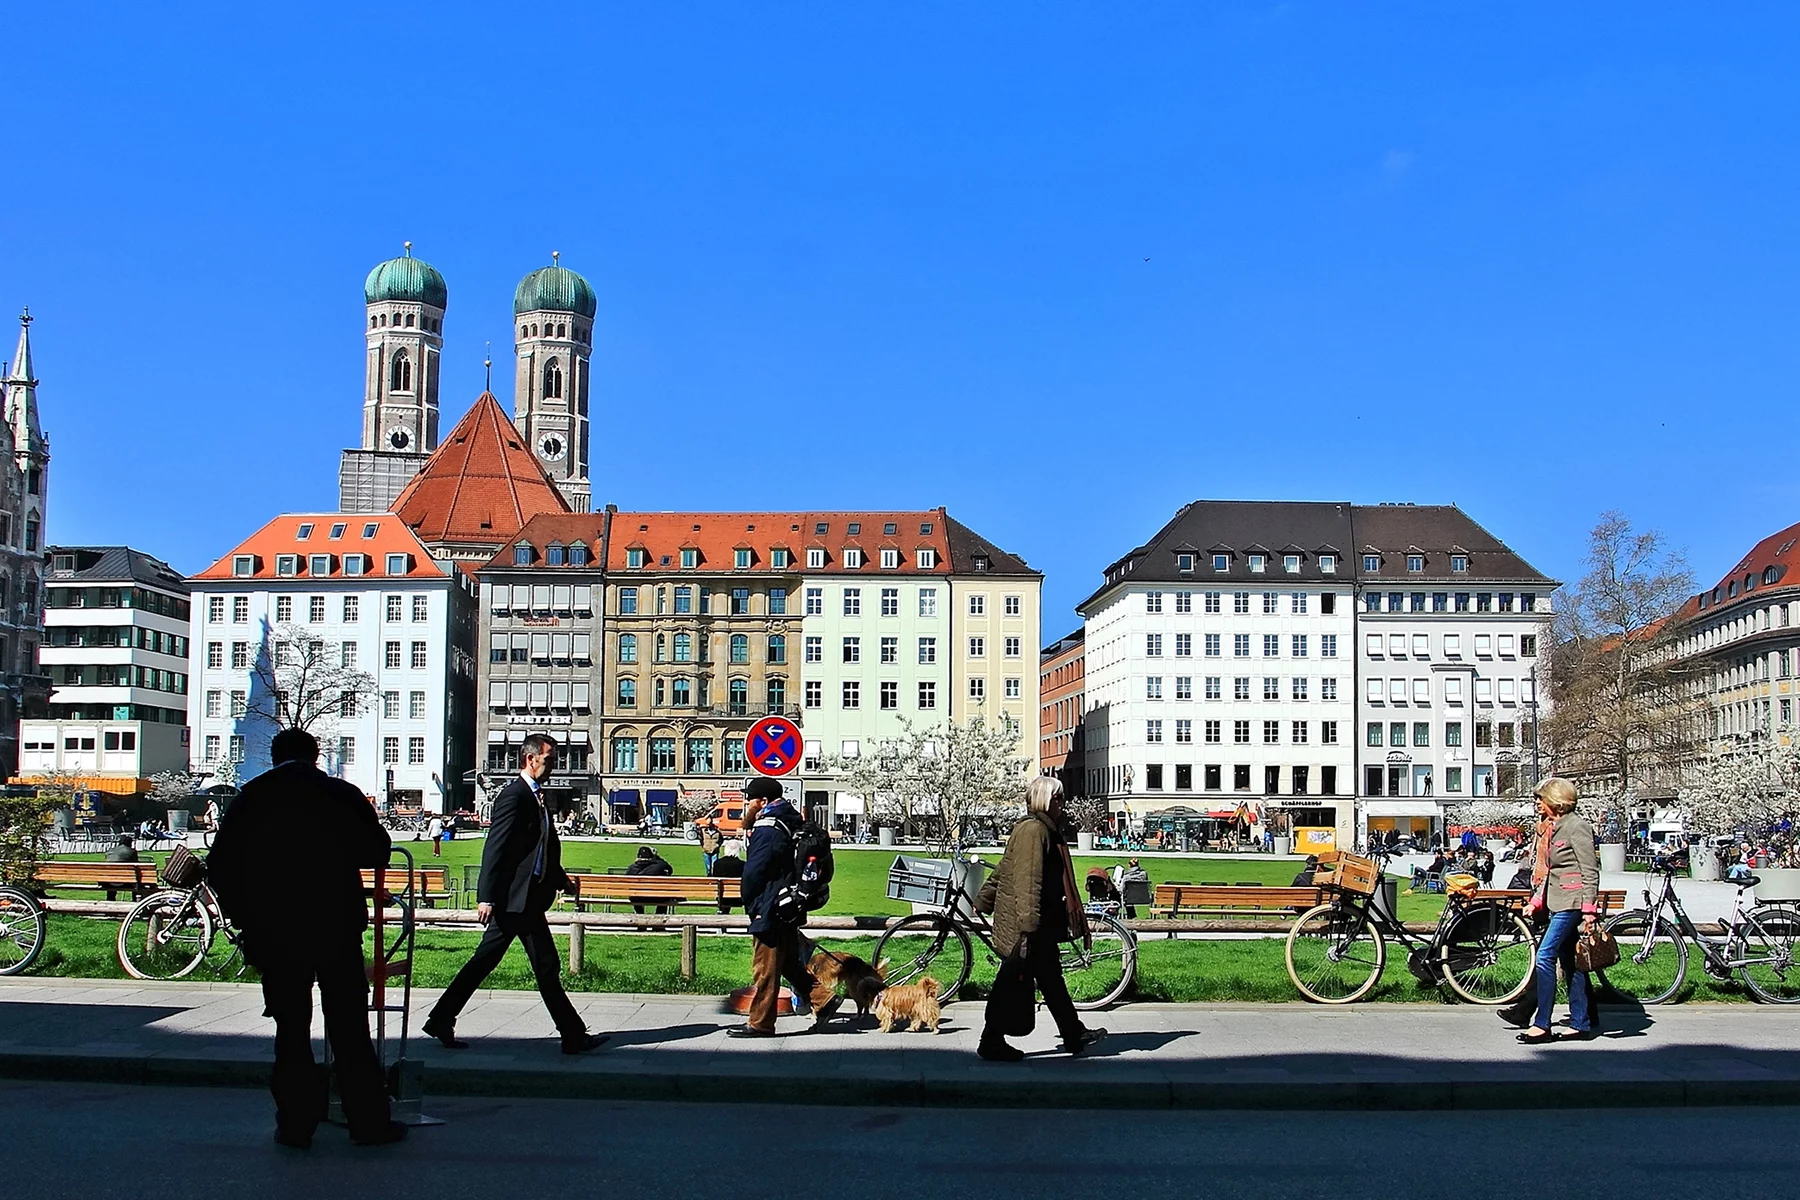 People walk past a park in Munich on a spring day